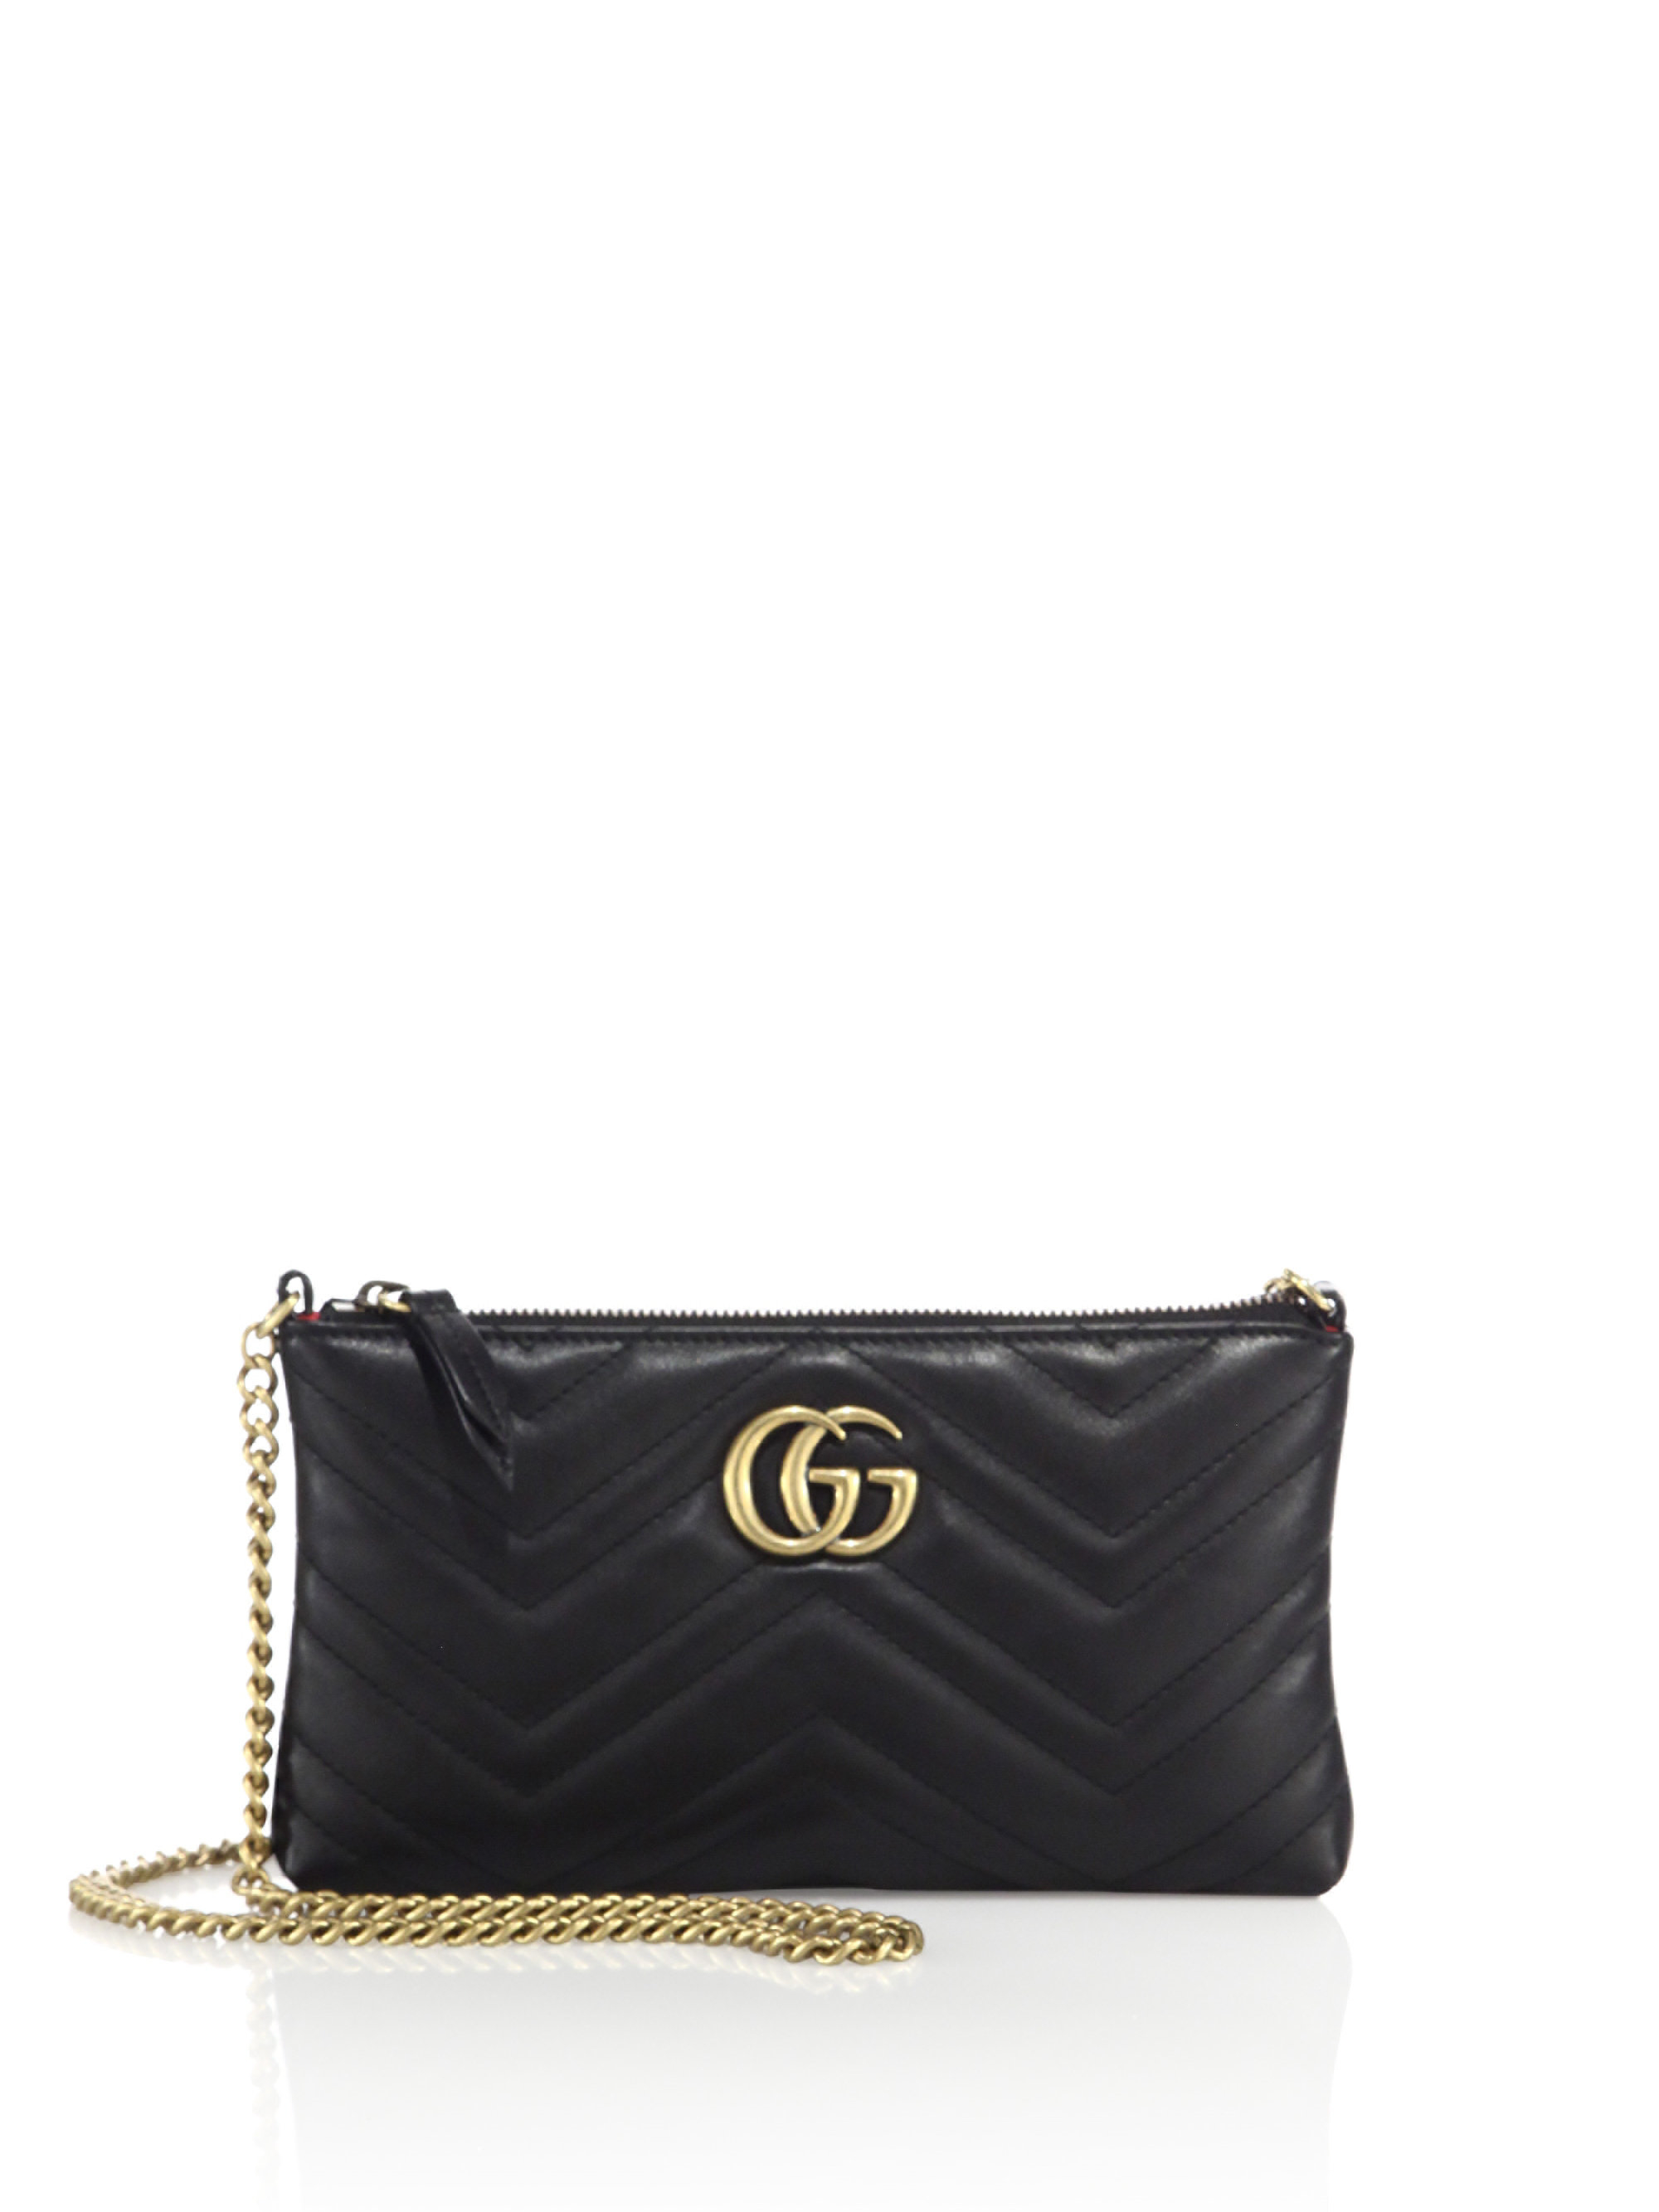 Gucci Quilted Leather Chain Wristlet in Black | Lyst